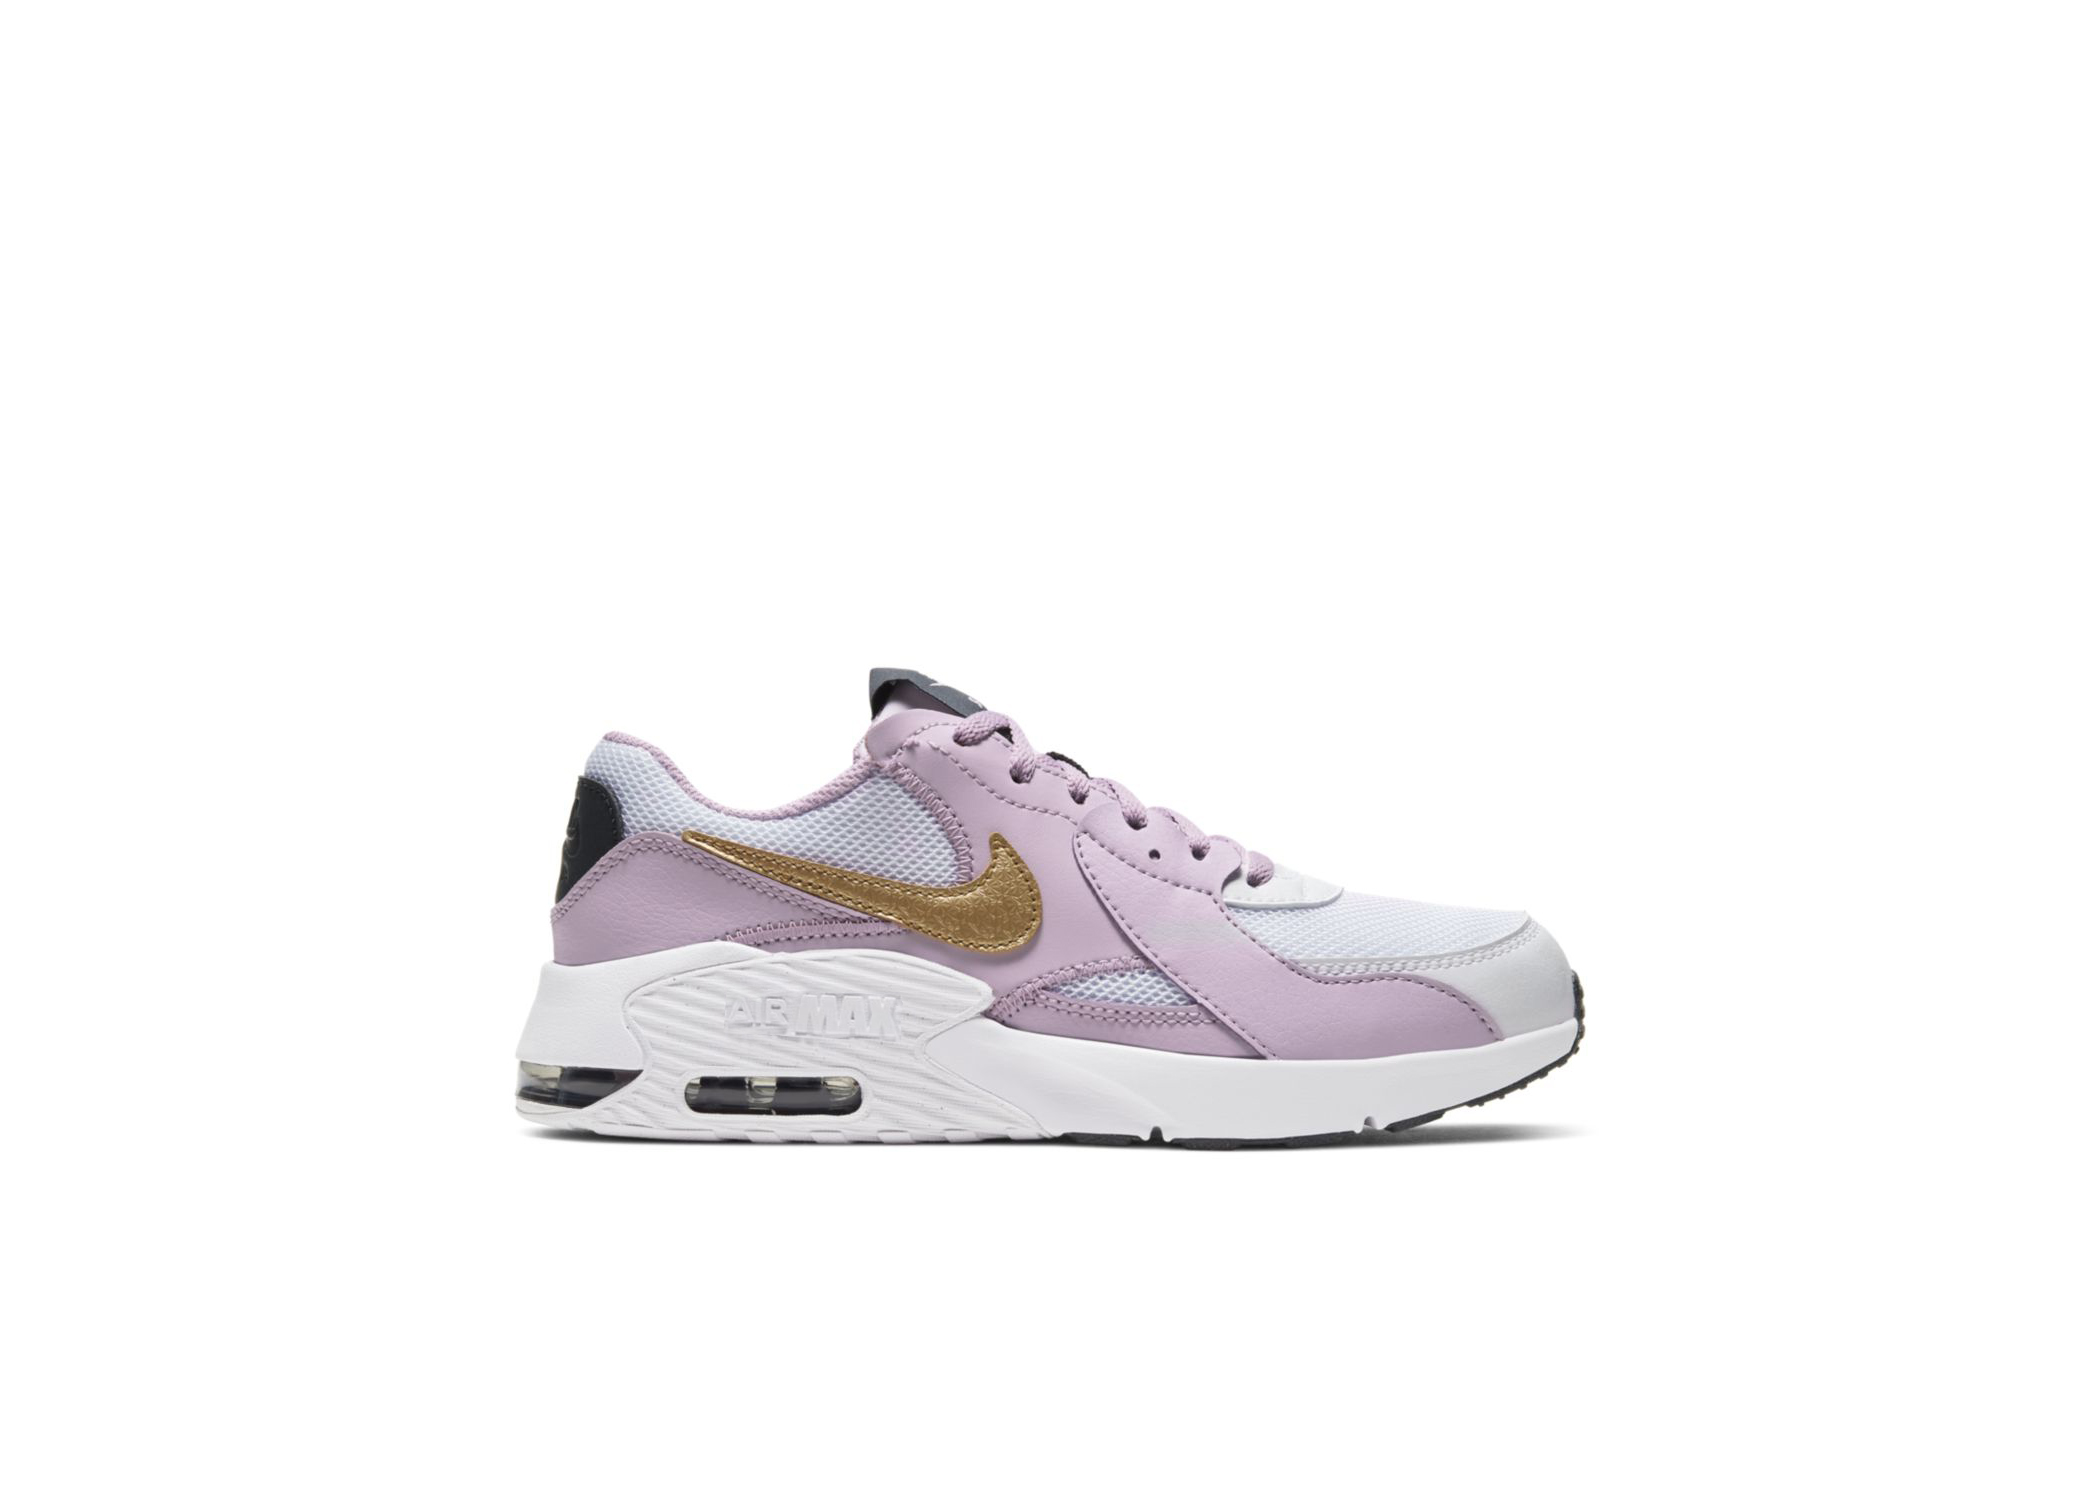 Nike Air Max Excee White Iced Lilac (GS) Kids' - CD6894-102 - US